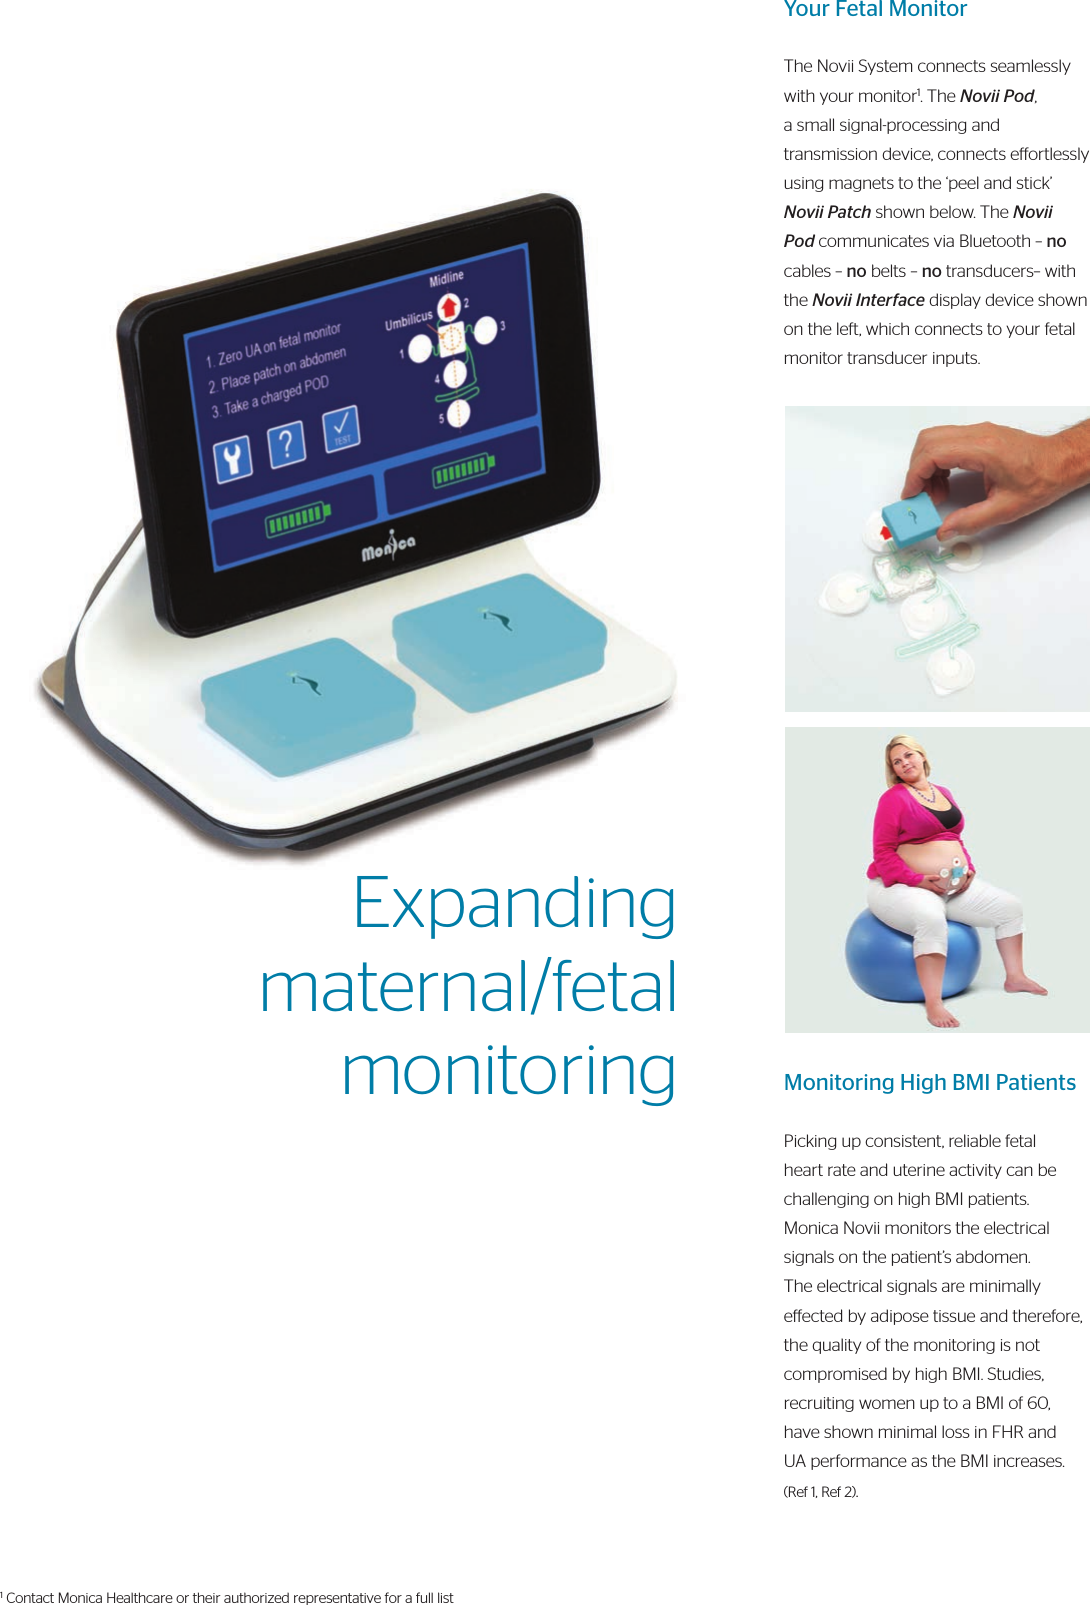 Your Fetal MonitorThe Novii System connects seamlessly with your monitor1. The Novii Pod, a small signal-processing and transmission device, connects eortlessly using magnets to the ‘peel and stick’ Novii Patch shown below. The Novii Pod communicates via Bluetooth – no cables – no belts – no transducers– with the Novii Interface display device shown on the left, which connects to your fetal monitor transducer inputs.Monitoring High BMI PatientsPicking up consistent, reliable fetal heart rate and uterine activity can be challenging on high BMI patients. Monica Novii monitors the electrical signals on the patient’s abdomen. The electrical signals are minimally eected by adipose tissue and therefore, the quality of the monitoring is not compromised by high BMI. Studies, recruiting women up to a BMI of 60, have shown minimal loss in FHR and UA performance as the BMI increases. (Ref 1, Ref 2).Expanding maternal/fetalmonitoring1 Contact Monica Healthcare or their authorized representative for a full list